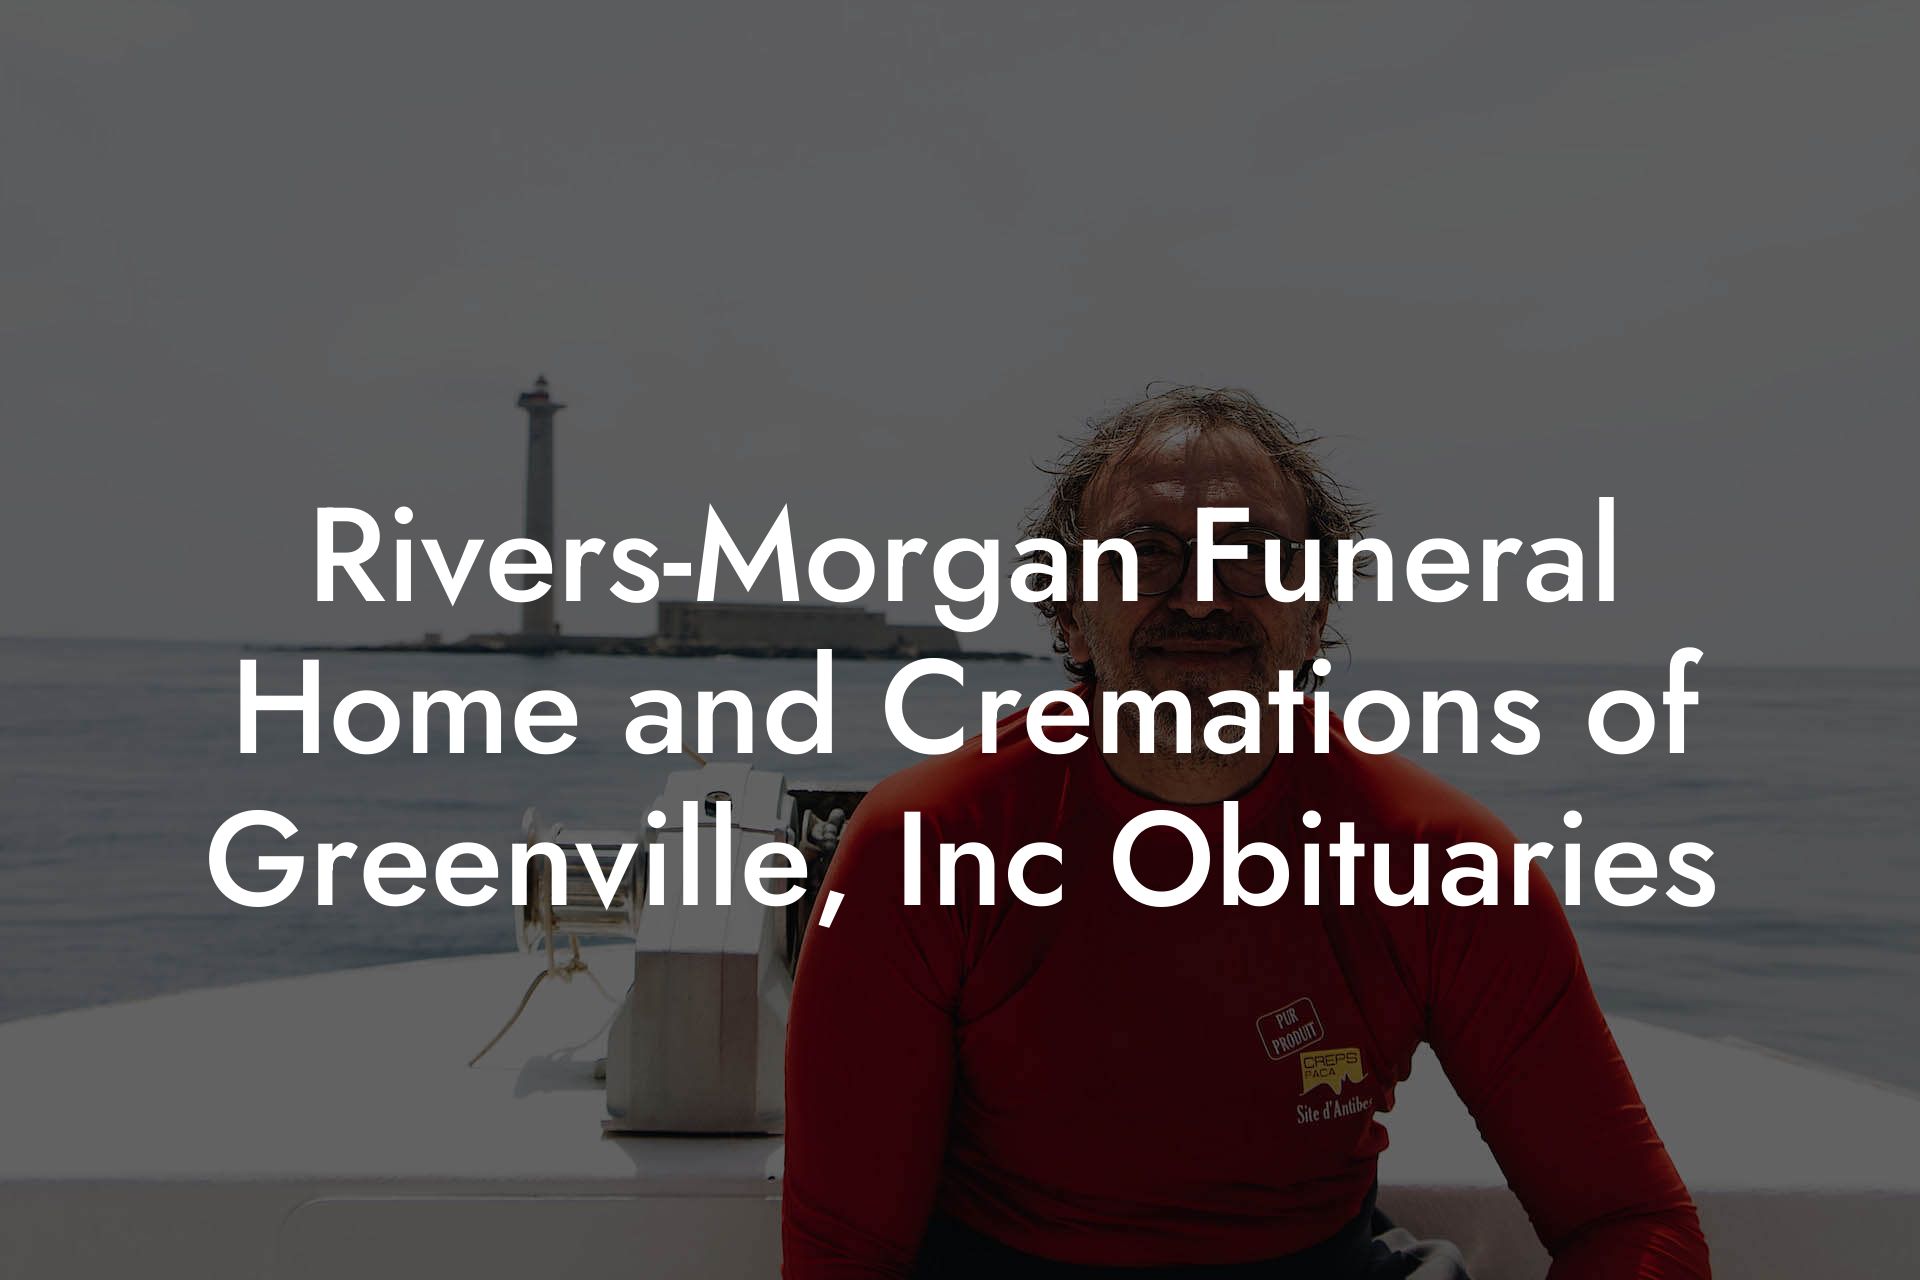 Rivers-Morgan Funeral Home and Cremations of Greenville, Inc Obituaries